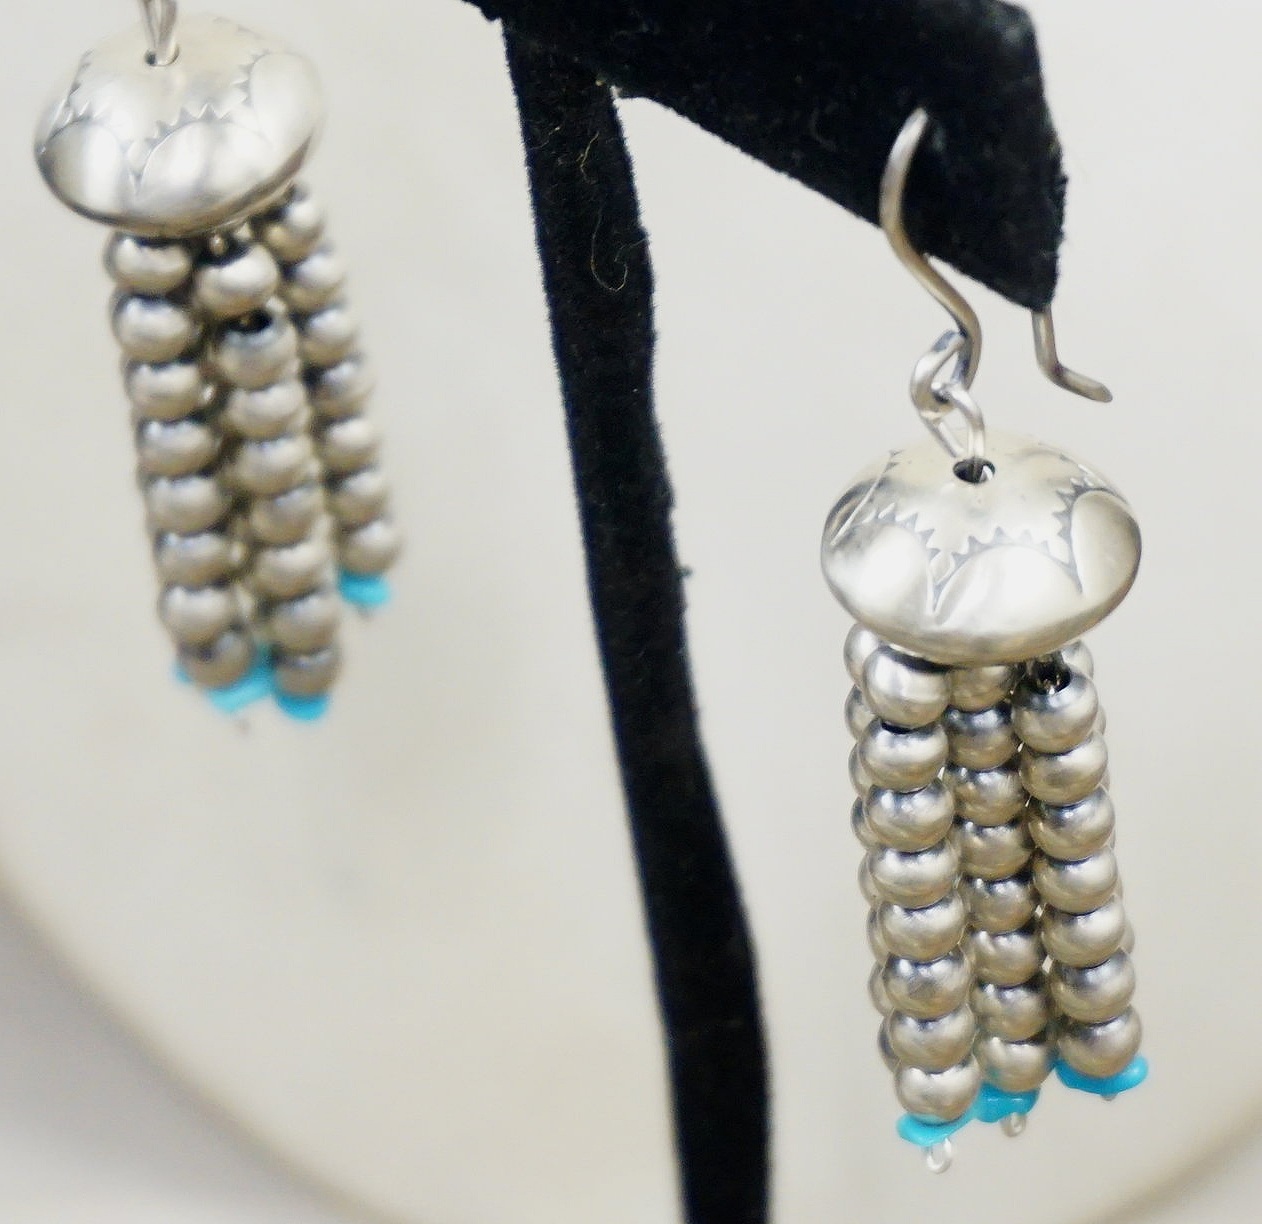 Details about   Navajo Indian Sterling Silver Turquoise Beaded Tassel Pendant by Jan Mariano 